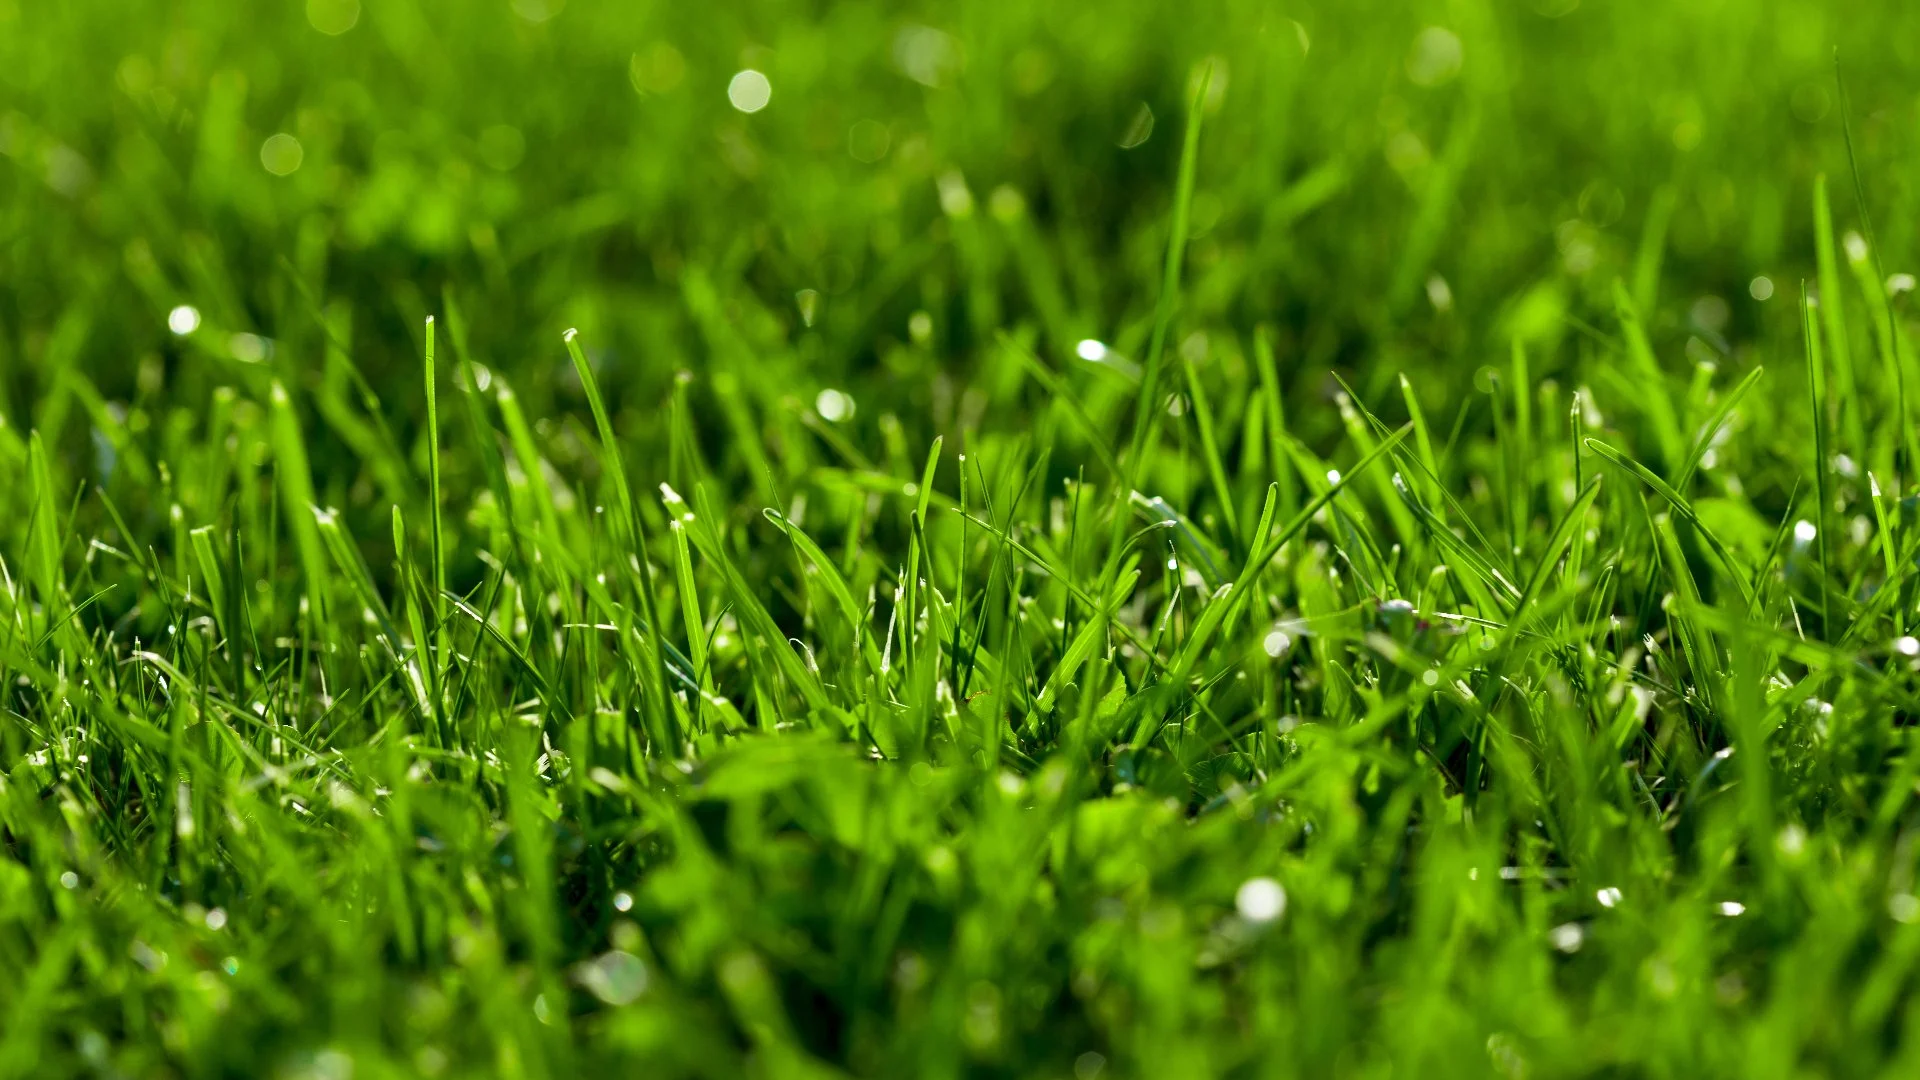 Growing a New Lawn? Consider This Before Choosing Between Sod & Seeds